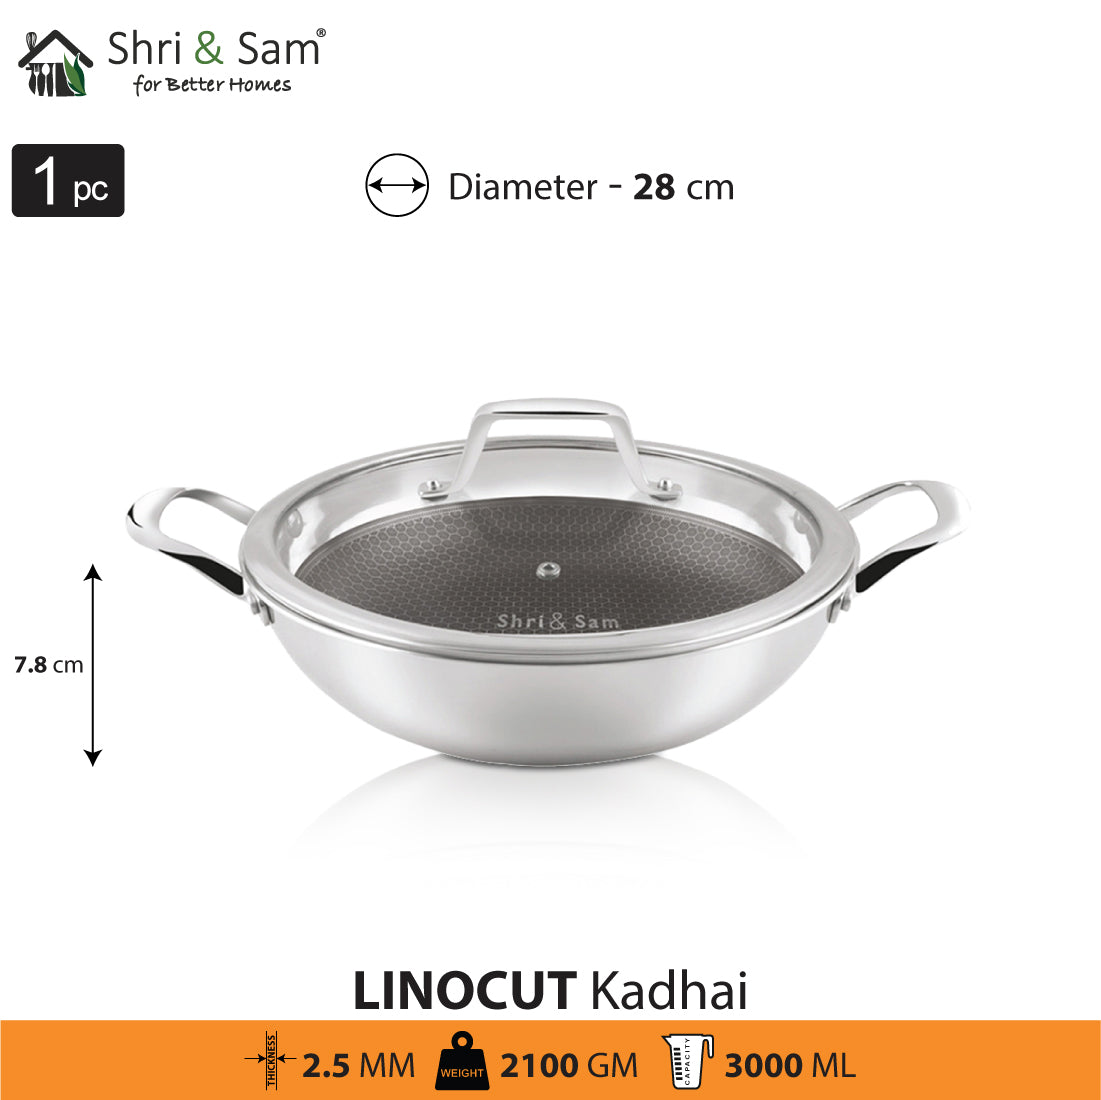 Stainless Steel Triply Non-Stick Kadhai with Glass Lid Linocut